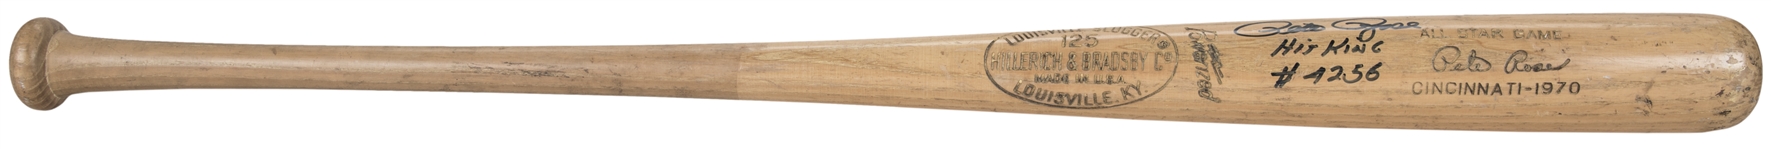 Historic 1970 Pete Rose All-Star Game Used & Signed Hillerich & Bradsby S2 Model Bat (PSA/DNA GU 9 & Beckett)